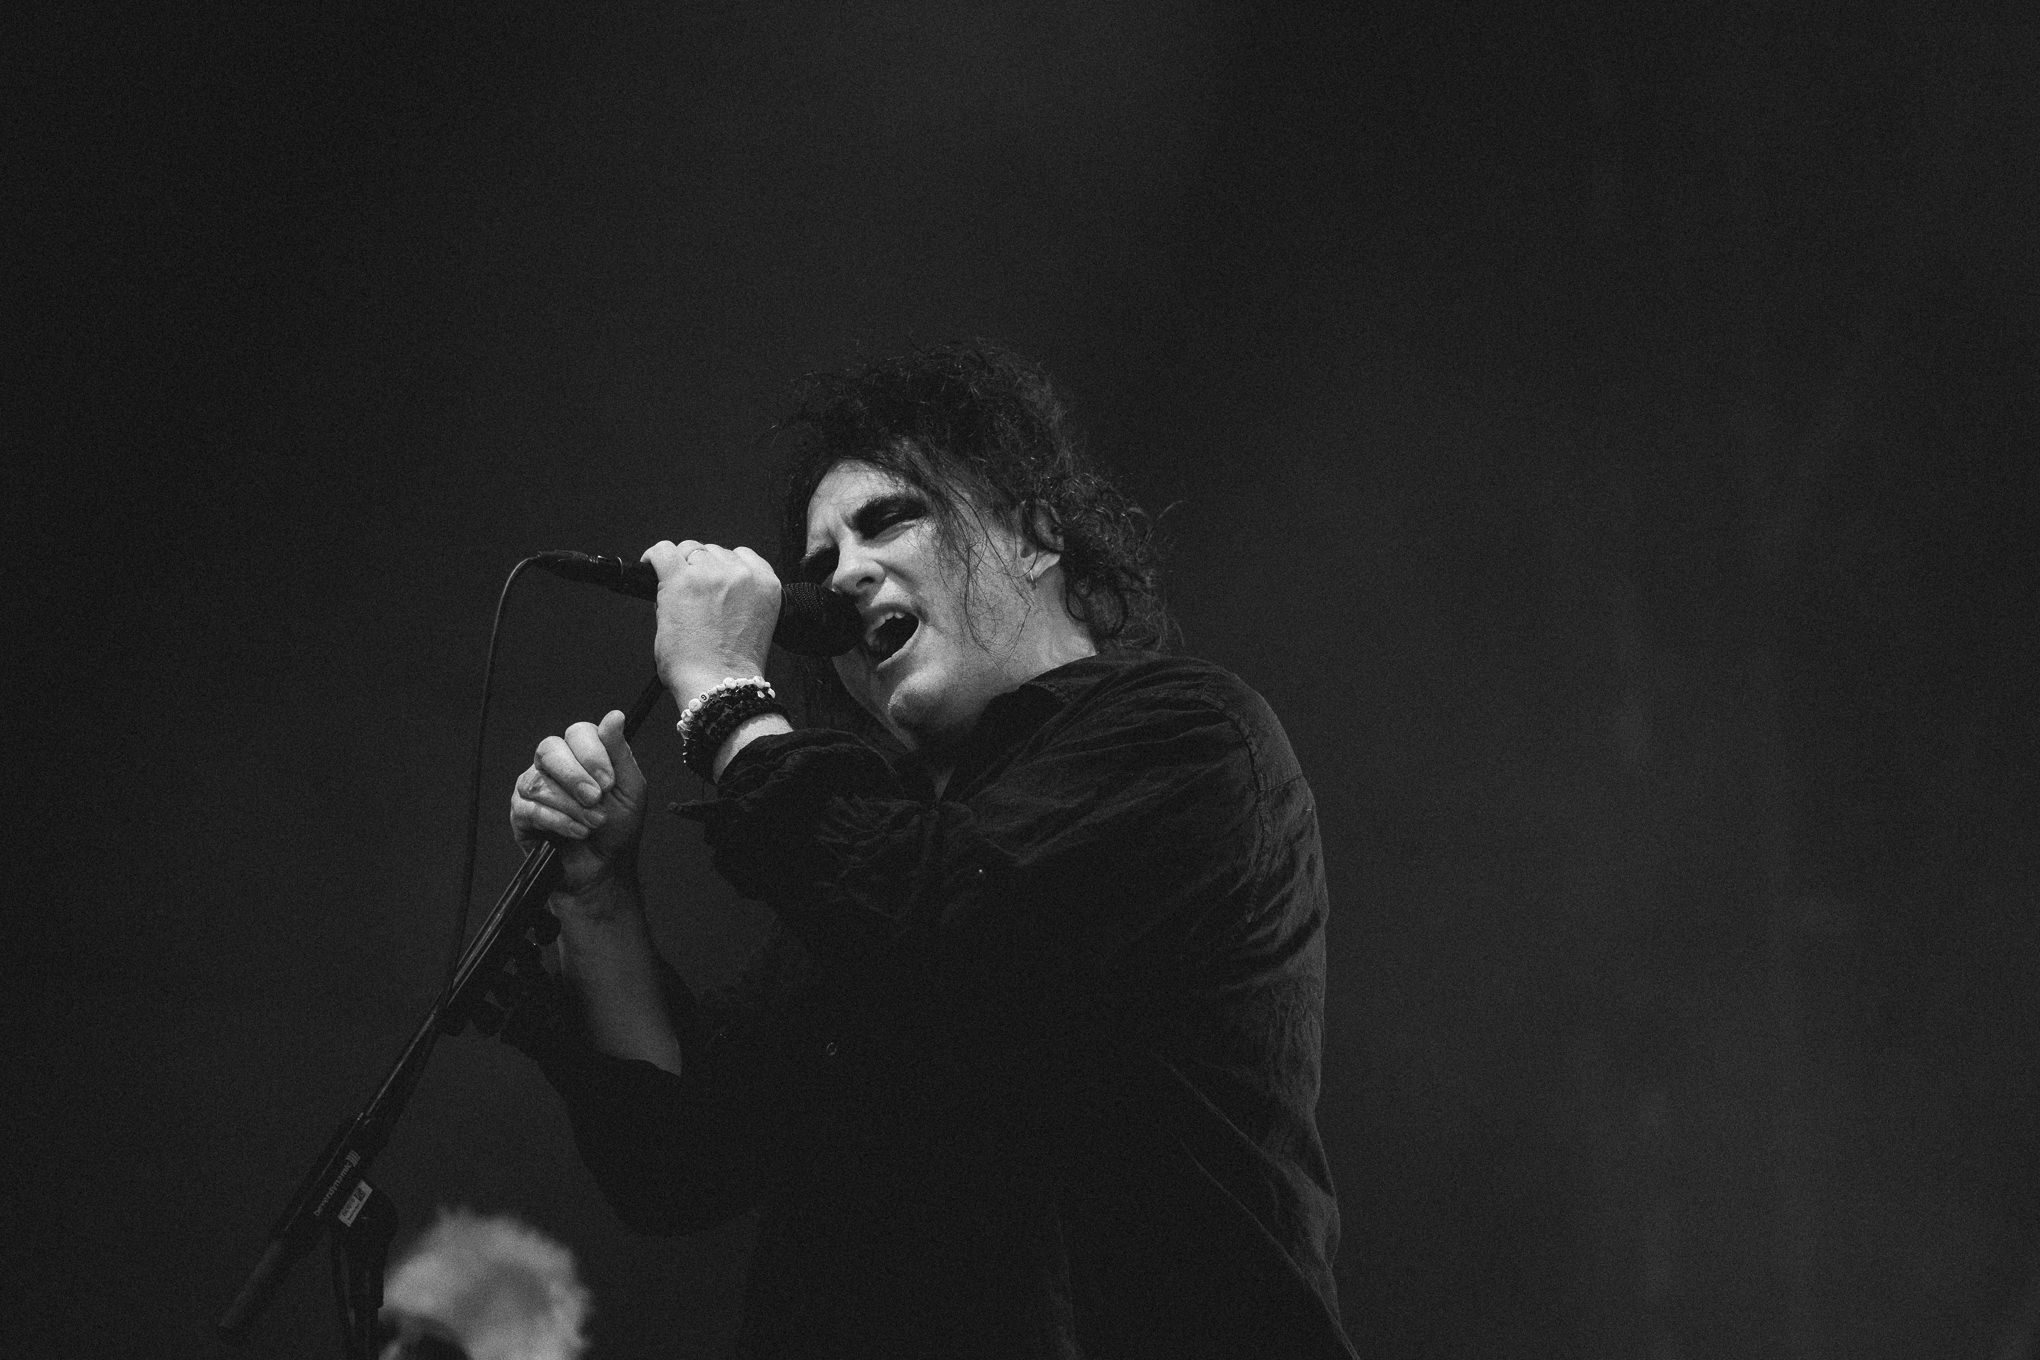 20190816_The Cure_003.jpg